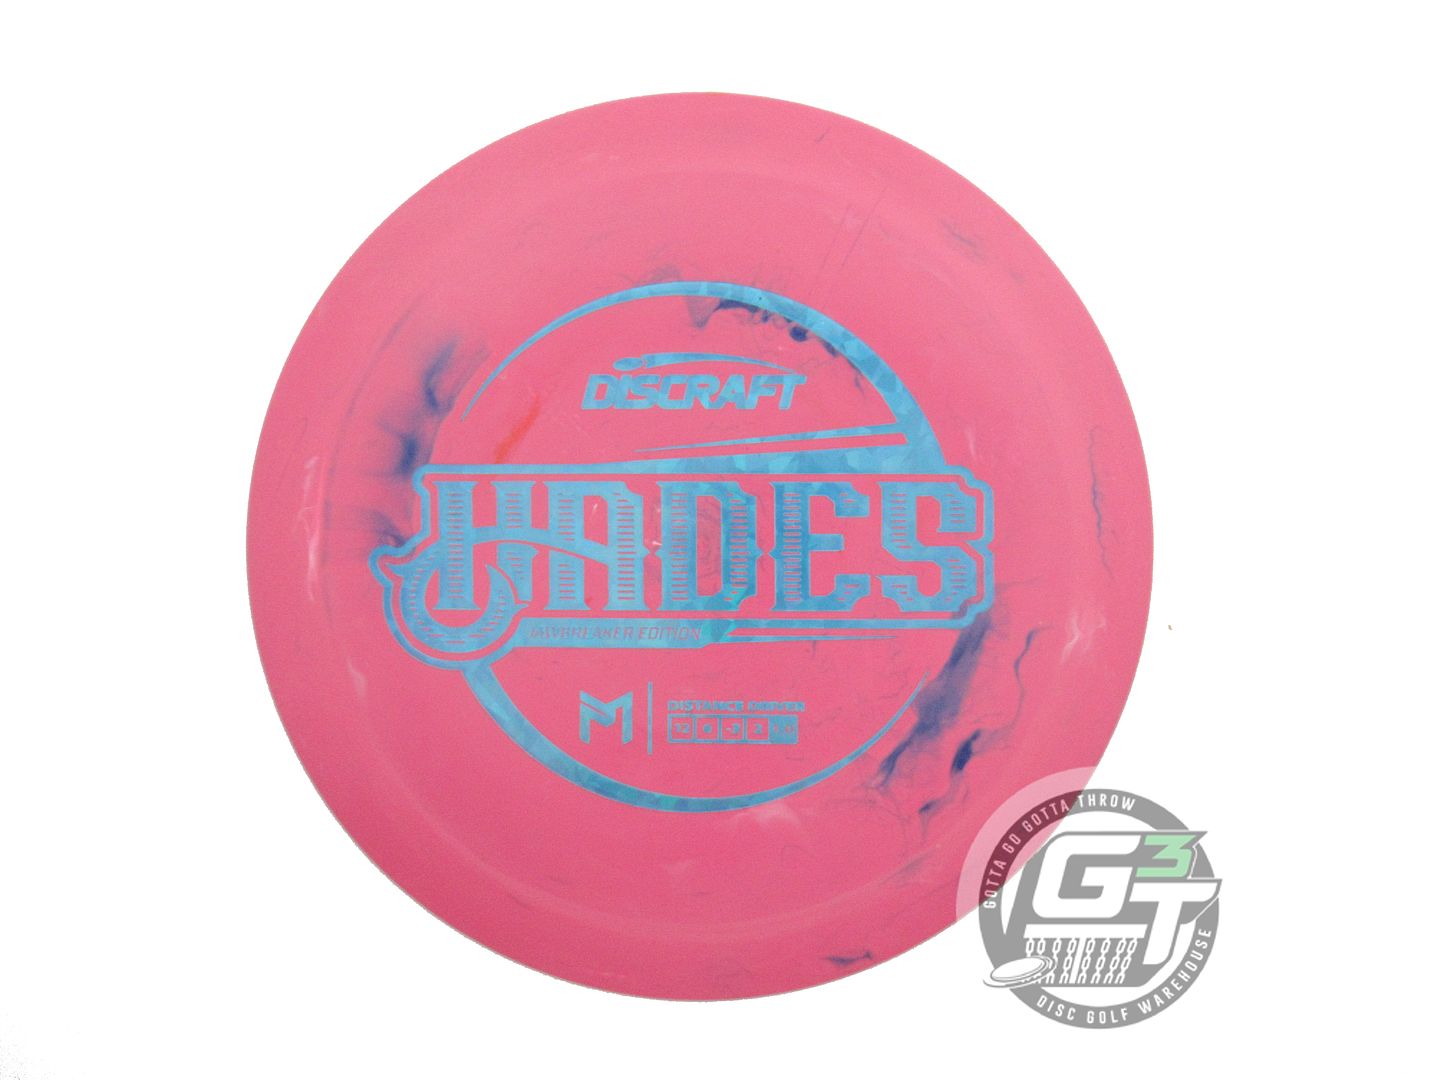 Discraft Limited Edition 2023 Elite Team Paul McBeth Jawbreaker Hades Distance Driver Golf Disc (Individually Listed)